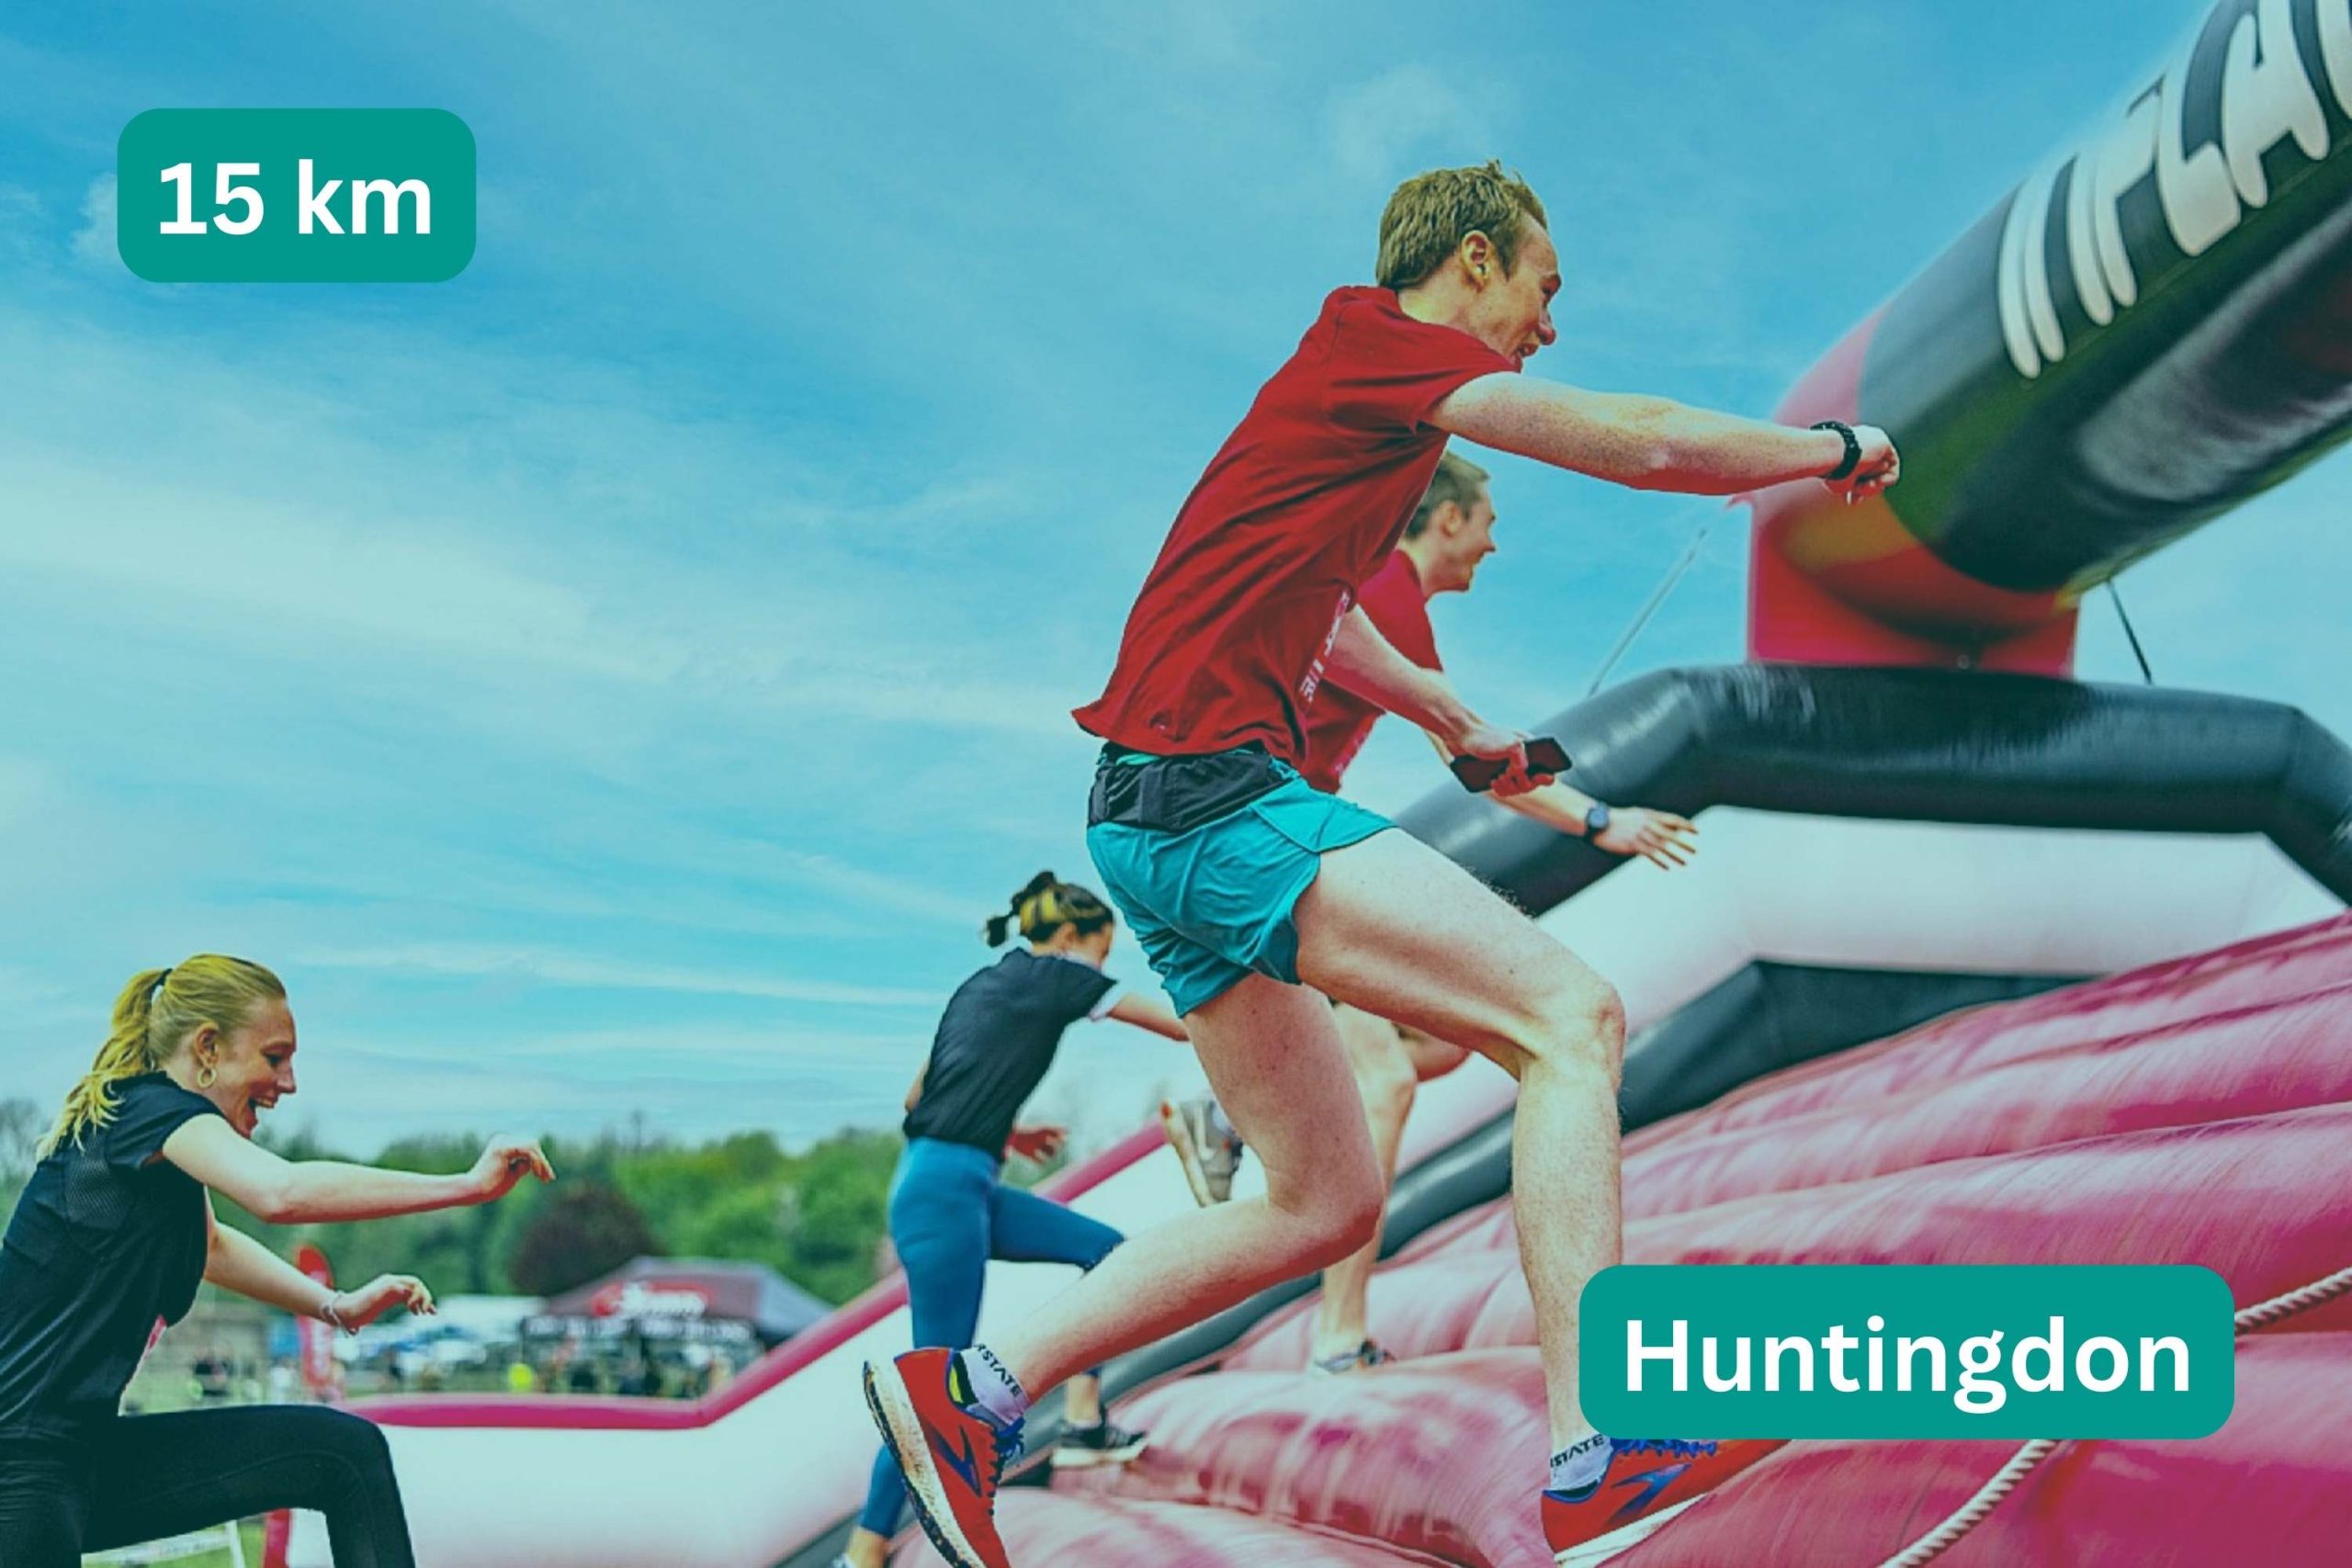 People climbing over inflatable obstacale. Headline text: 15km, Huntingdon